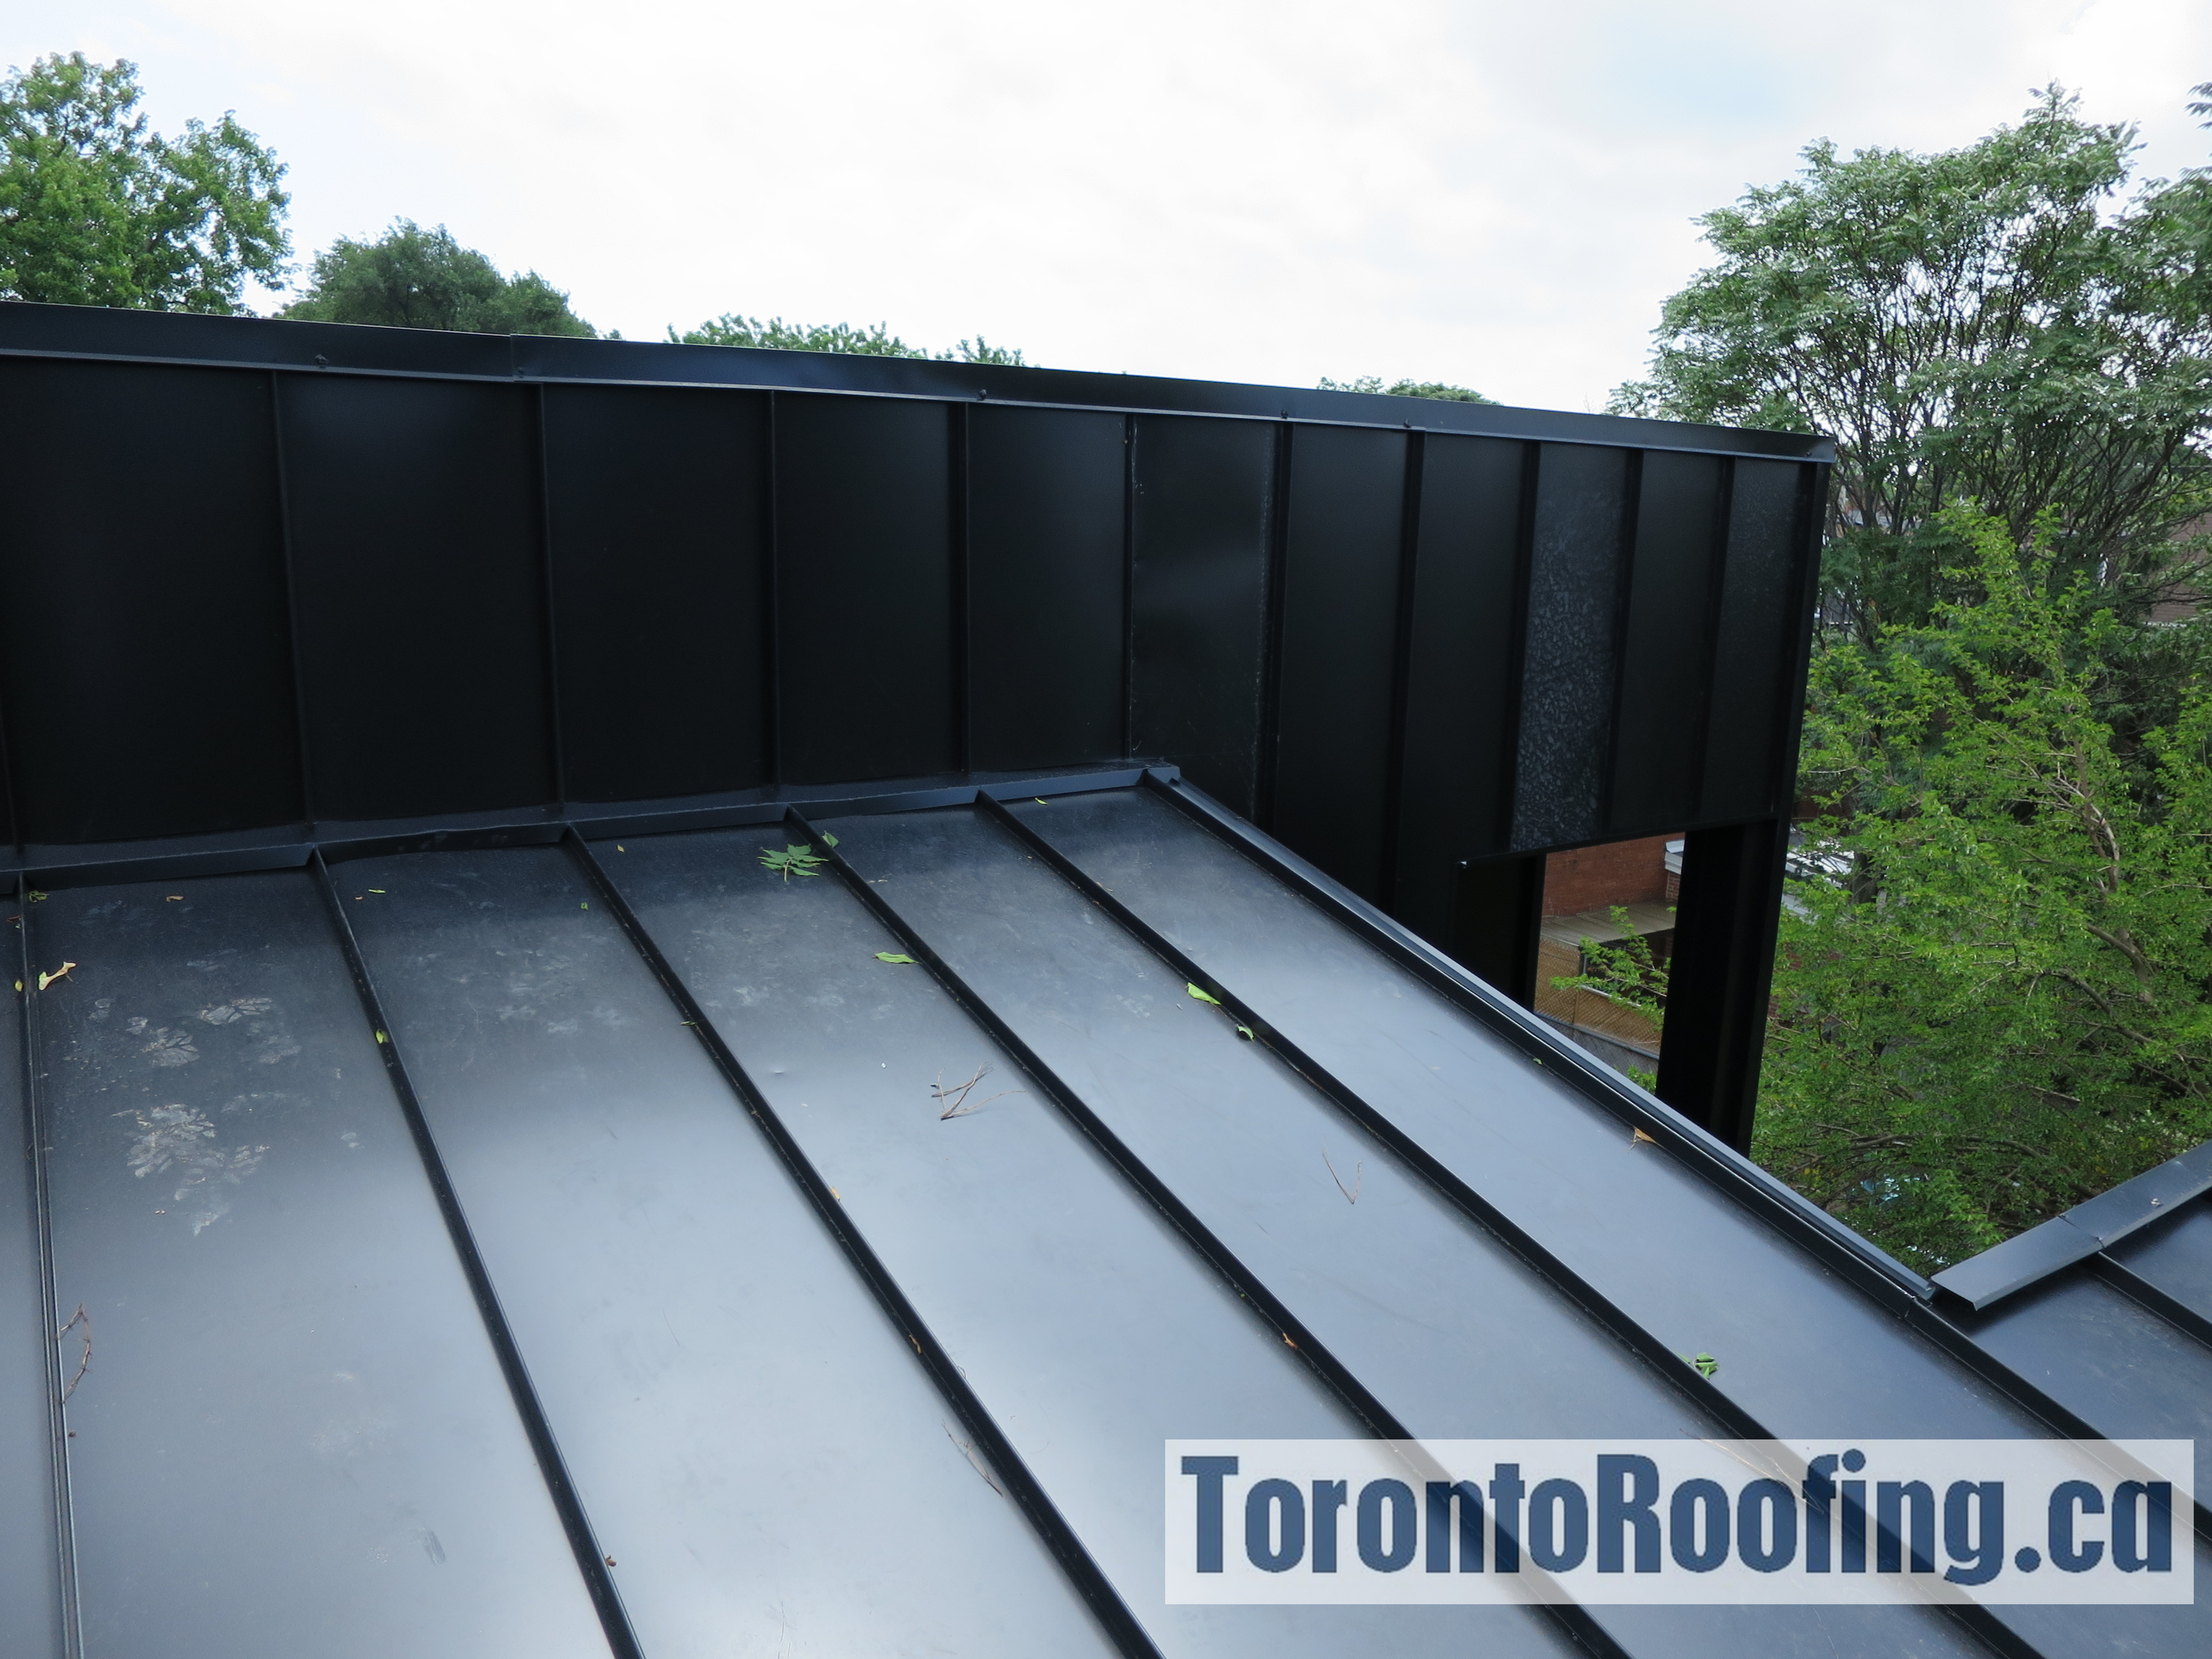 Toronto,roofing,standing,seam,metal,roofing,home,commercial,installers,roof,architecture,shingle,steel